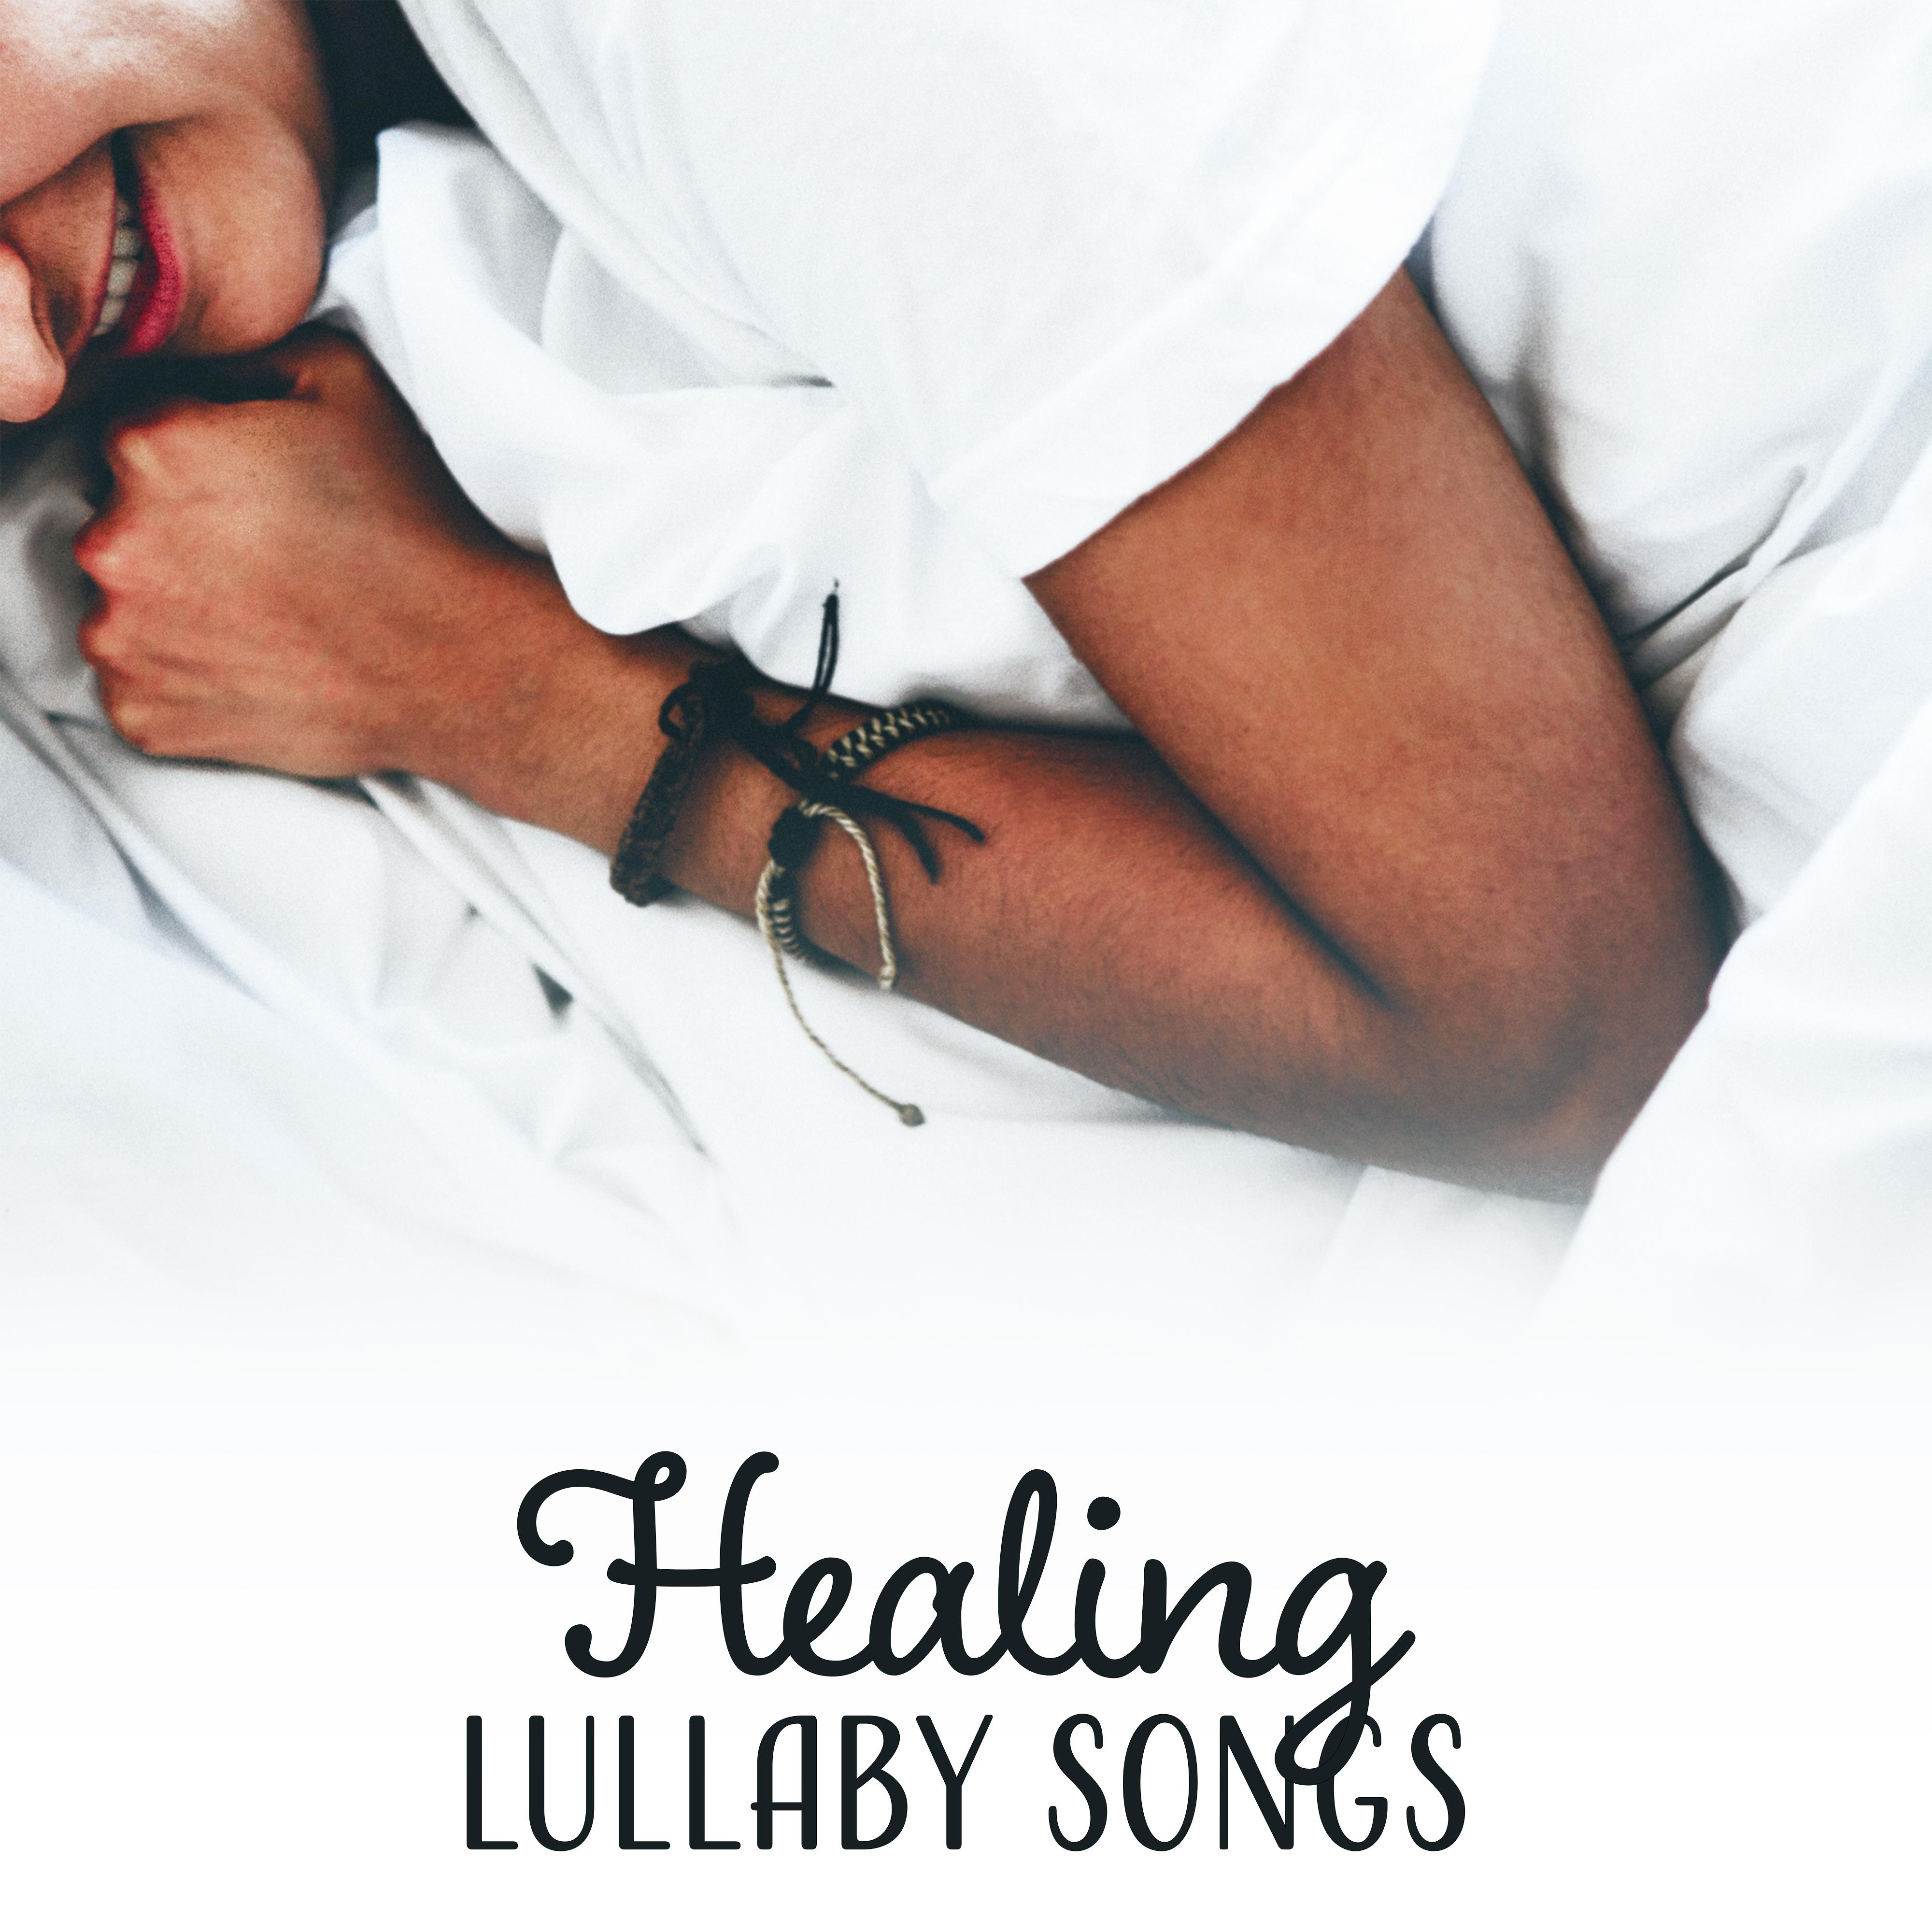 Healing Lullaby Songs  Peaceful Melodies, Nature Sounds, Music for Deep Sleep, Relax, Cure Insomnia